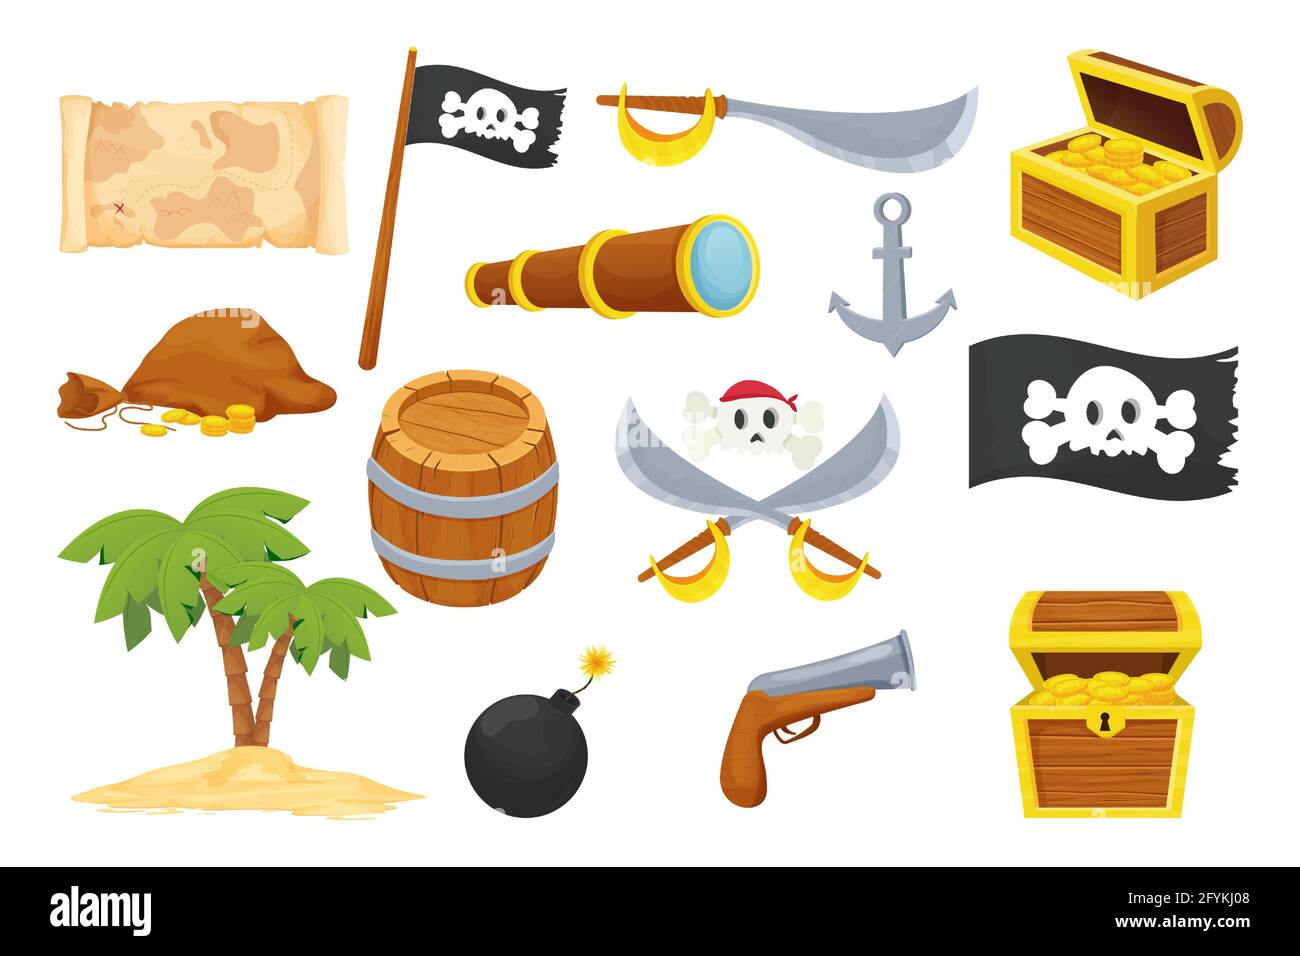 Pirate set with funny skull, wooden treasure chest, barrel, weapon, black  flag and map in cartoon